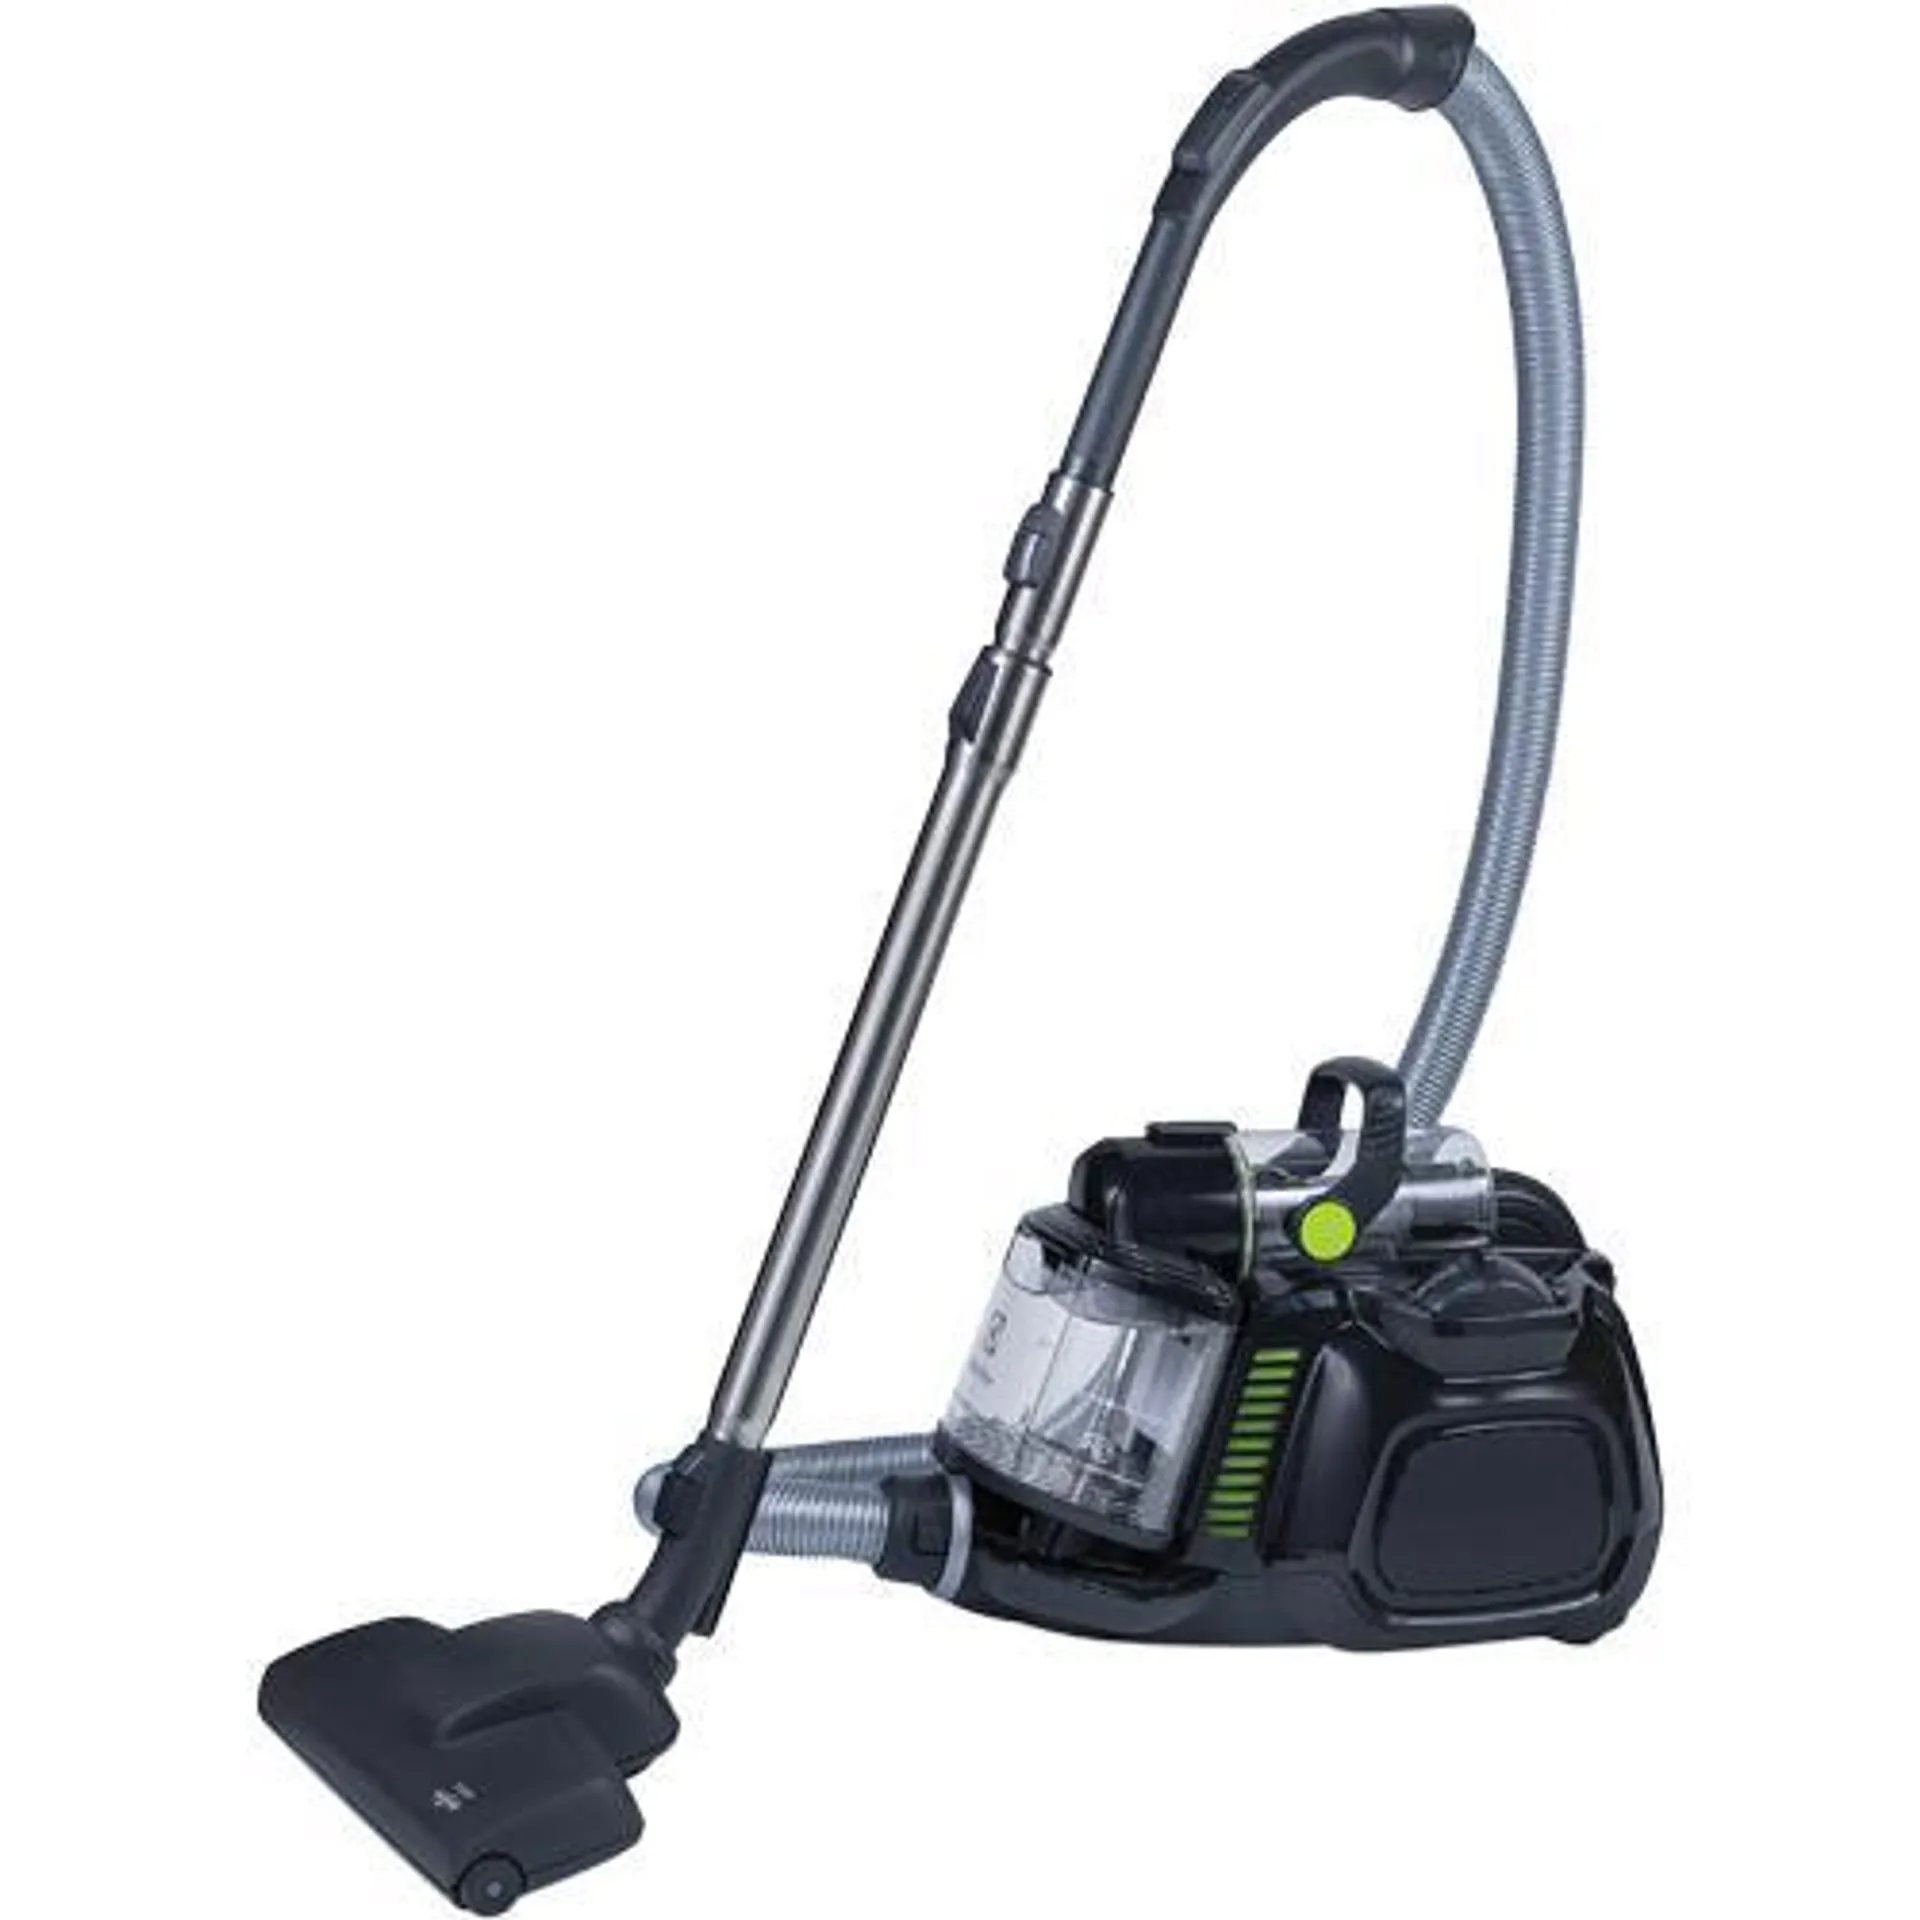 Silent Performer Cyclonic Canister Vacuum Cleaner